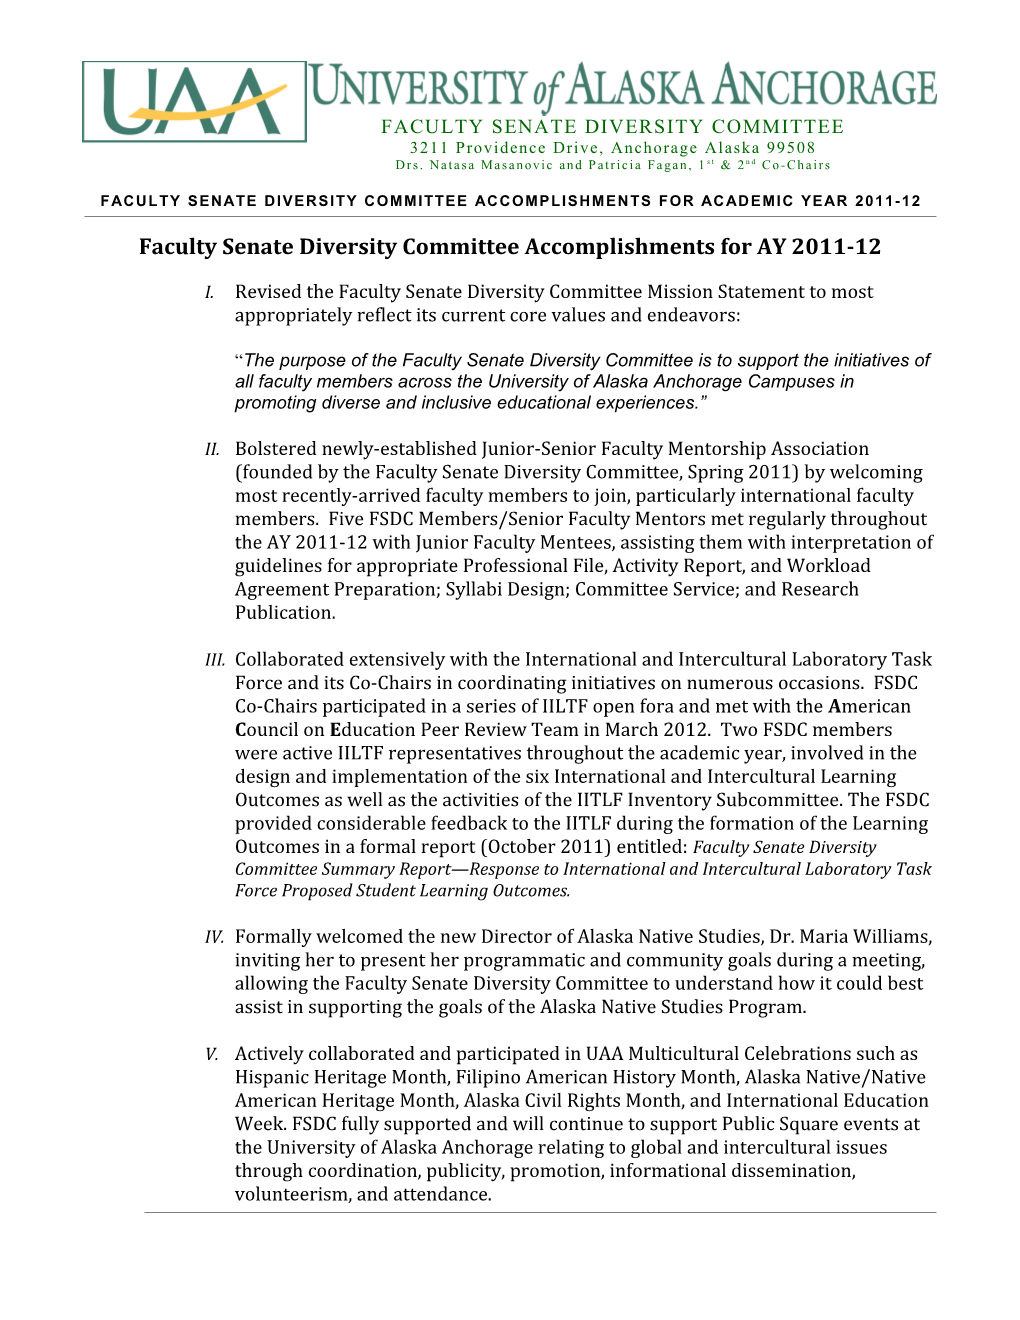 Faculty Senate Diversity Committee Report for August 19, 2011